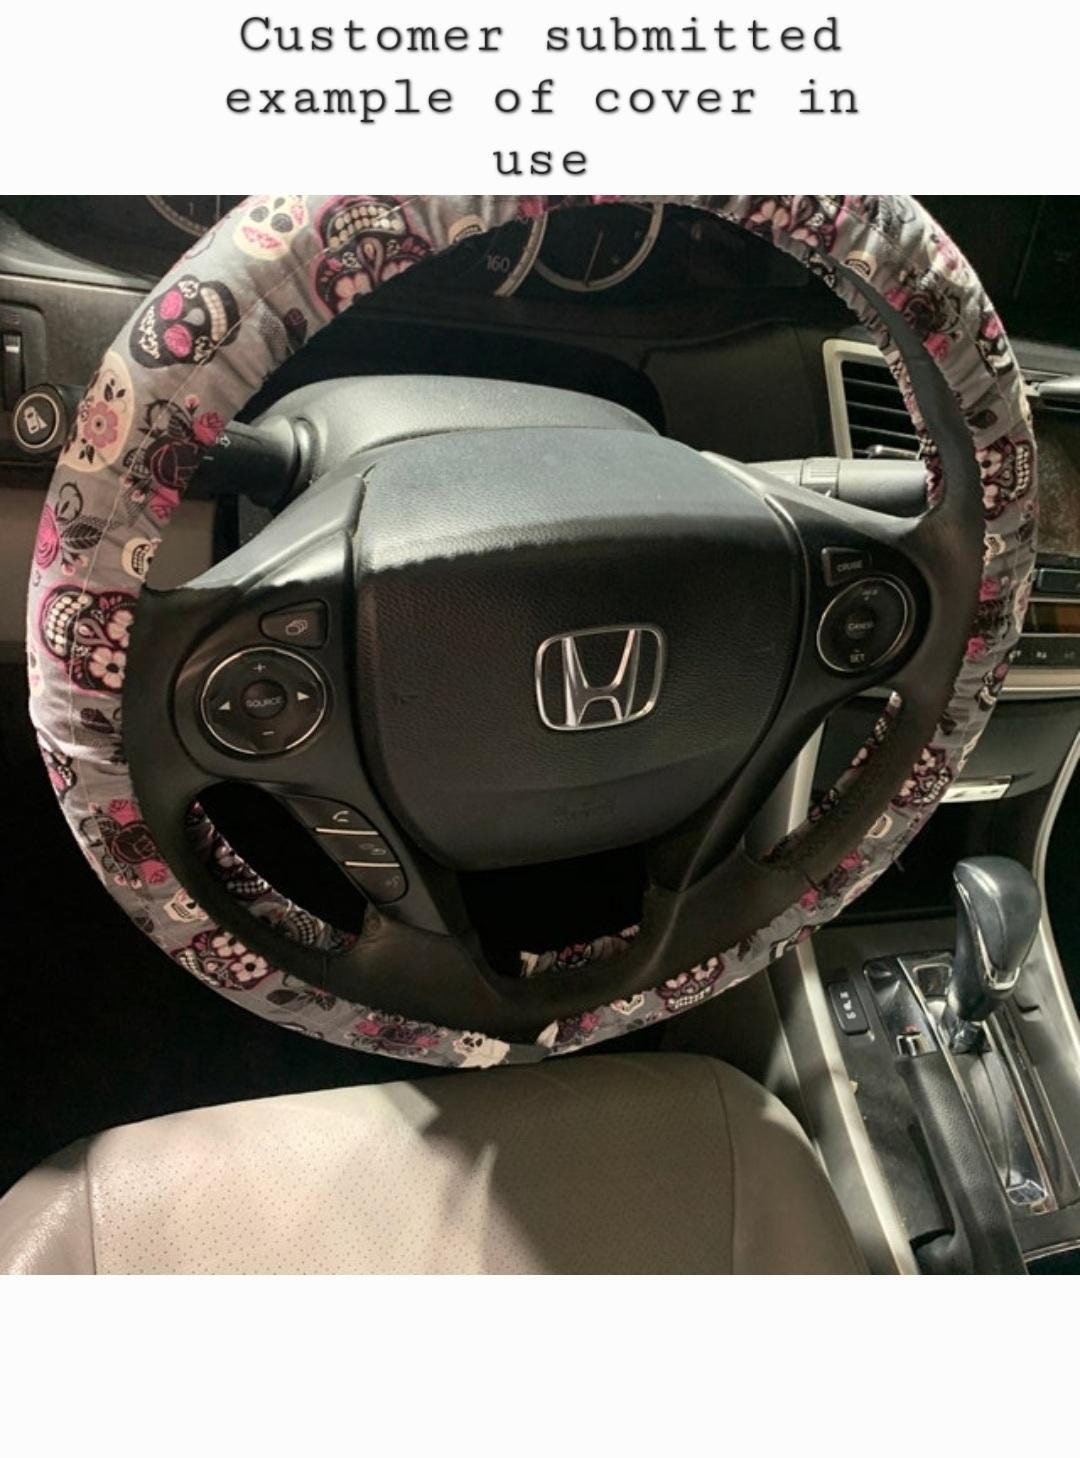 Deer Steering Wheel Cover, Custom Car Accessories, 100% Cotton Washable - Harlow's Store and Garden Gifts